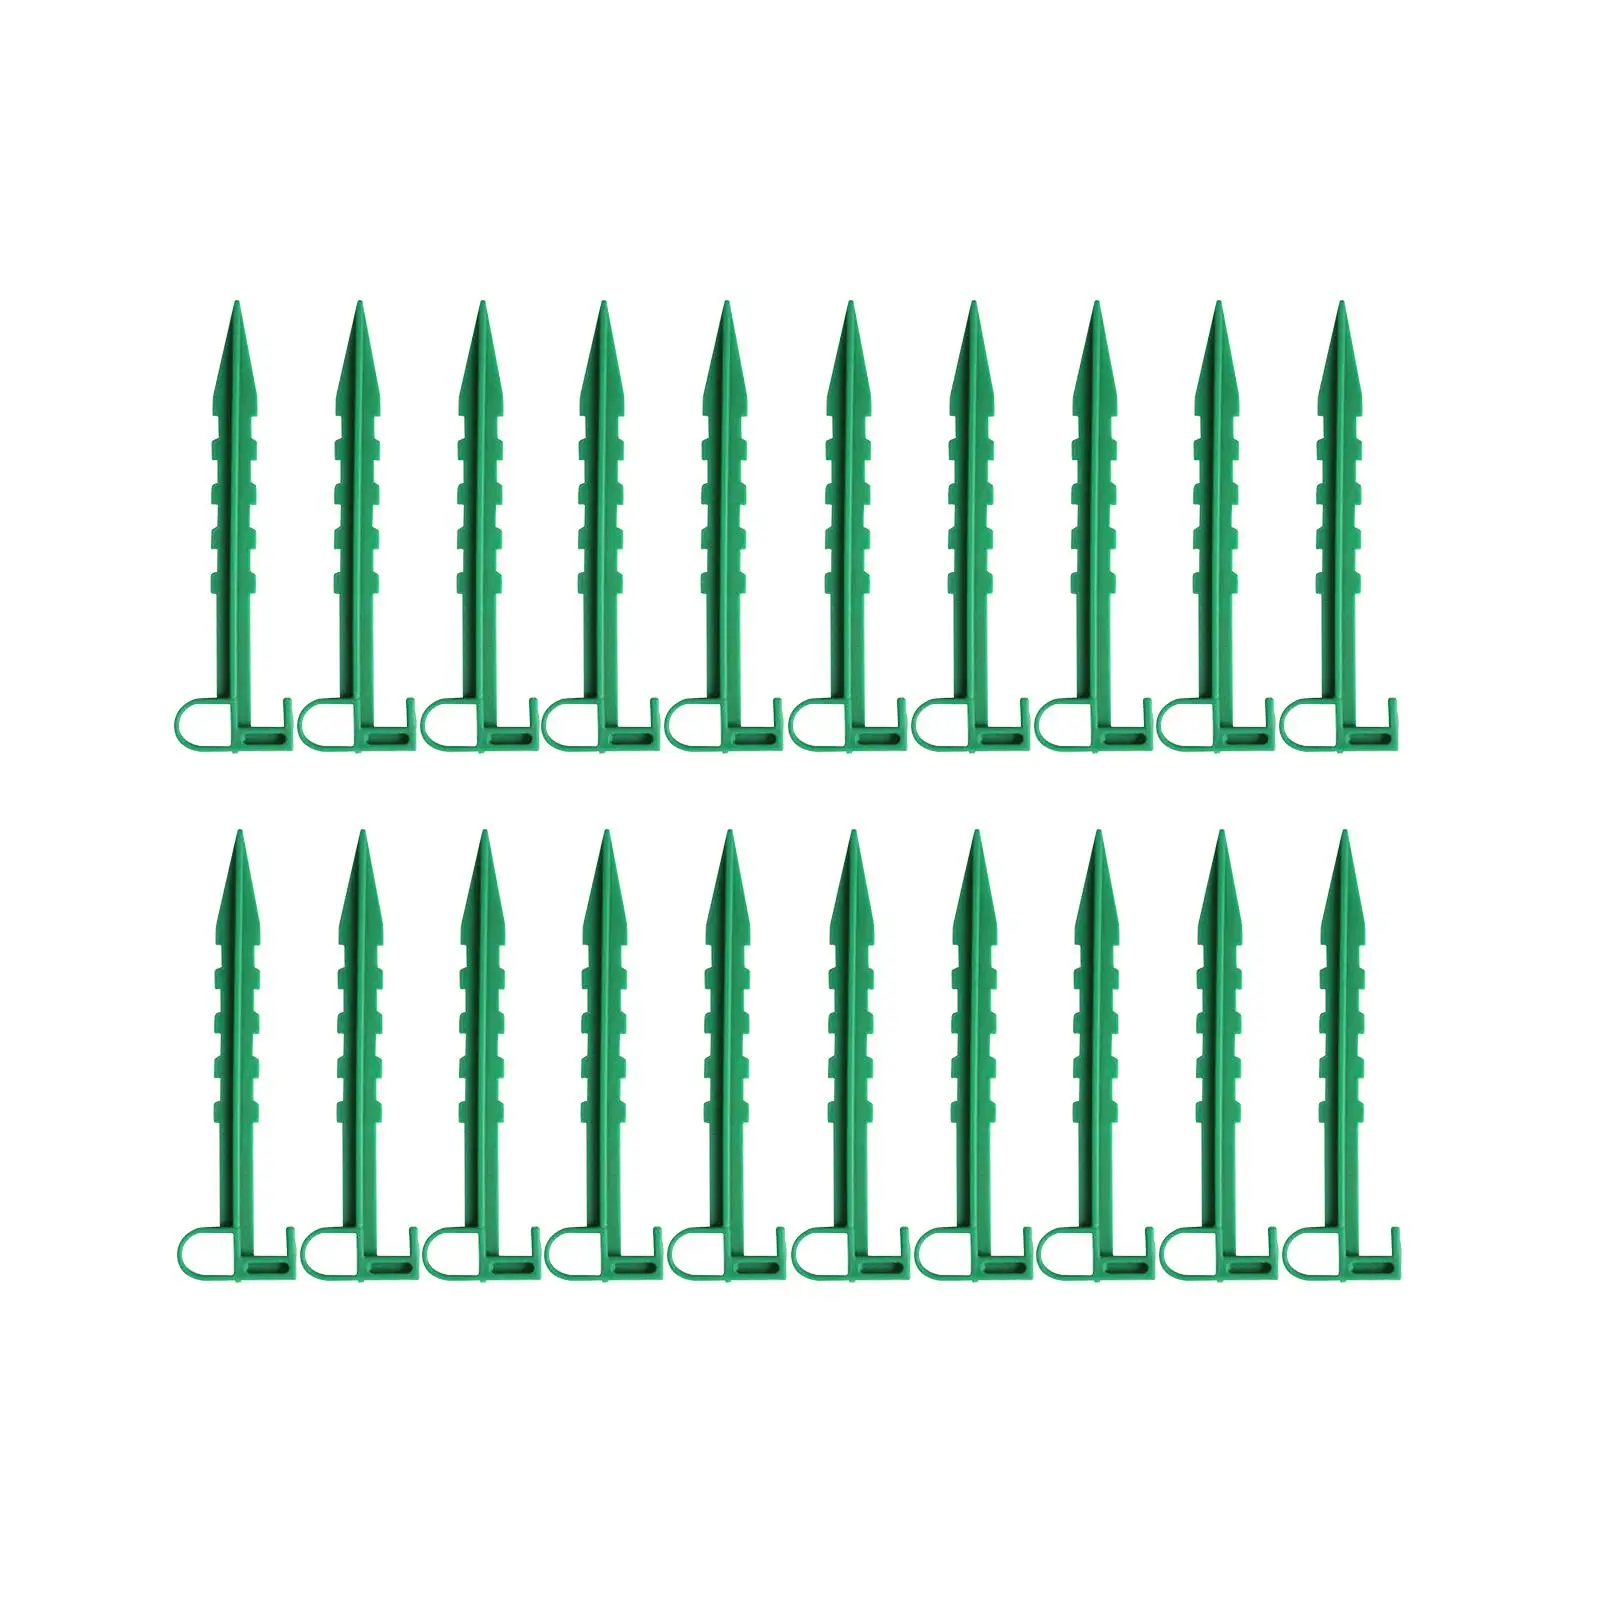 20x Garden Stakes Yard Fixed Fences Landscape Nails Anchor Fixing Anchor Pegs for Tents Securing Landscape Fabric Lawn Edging